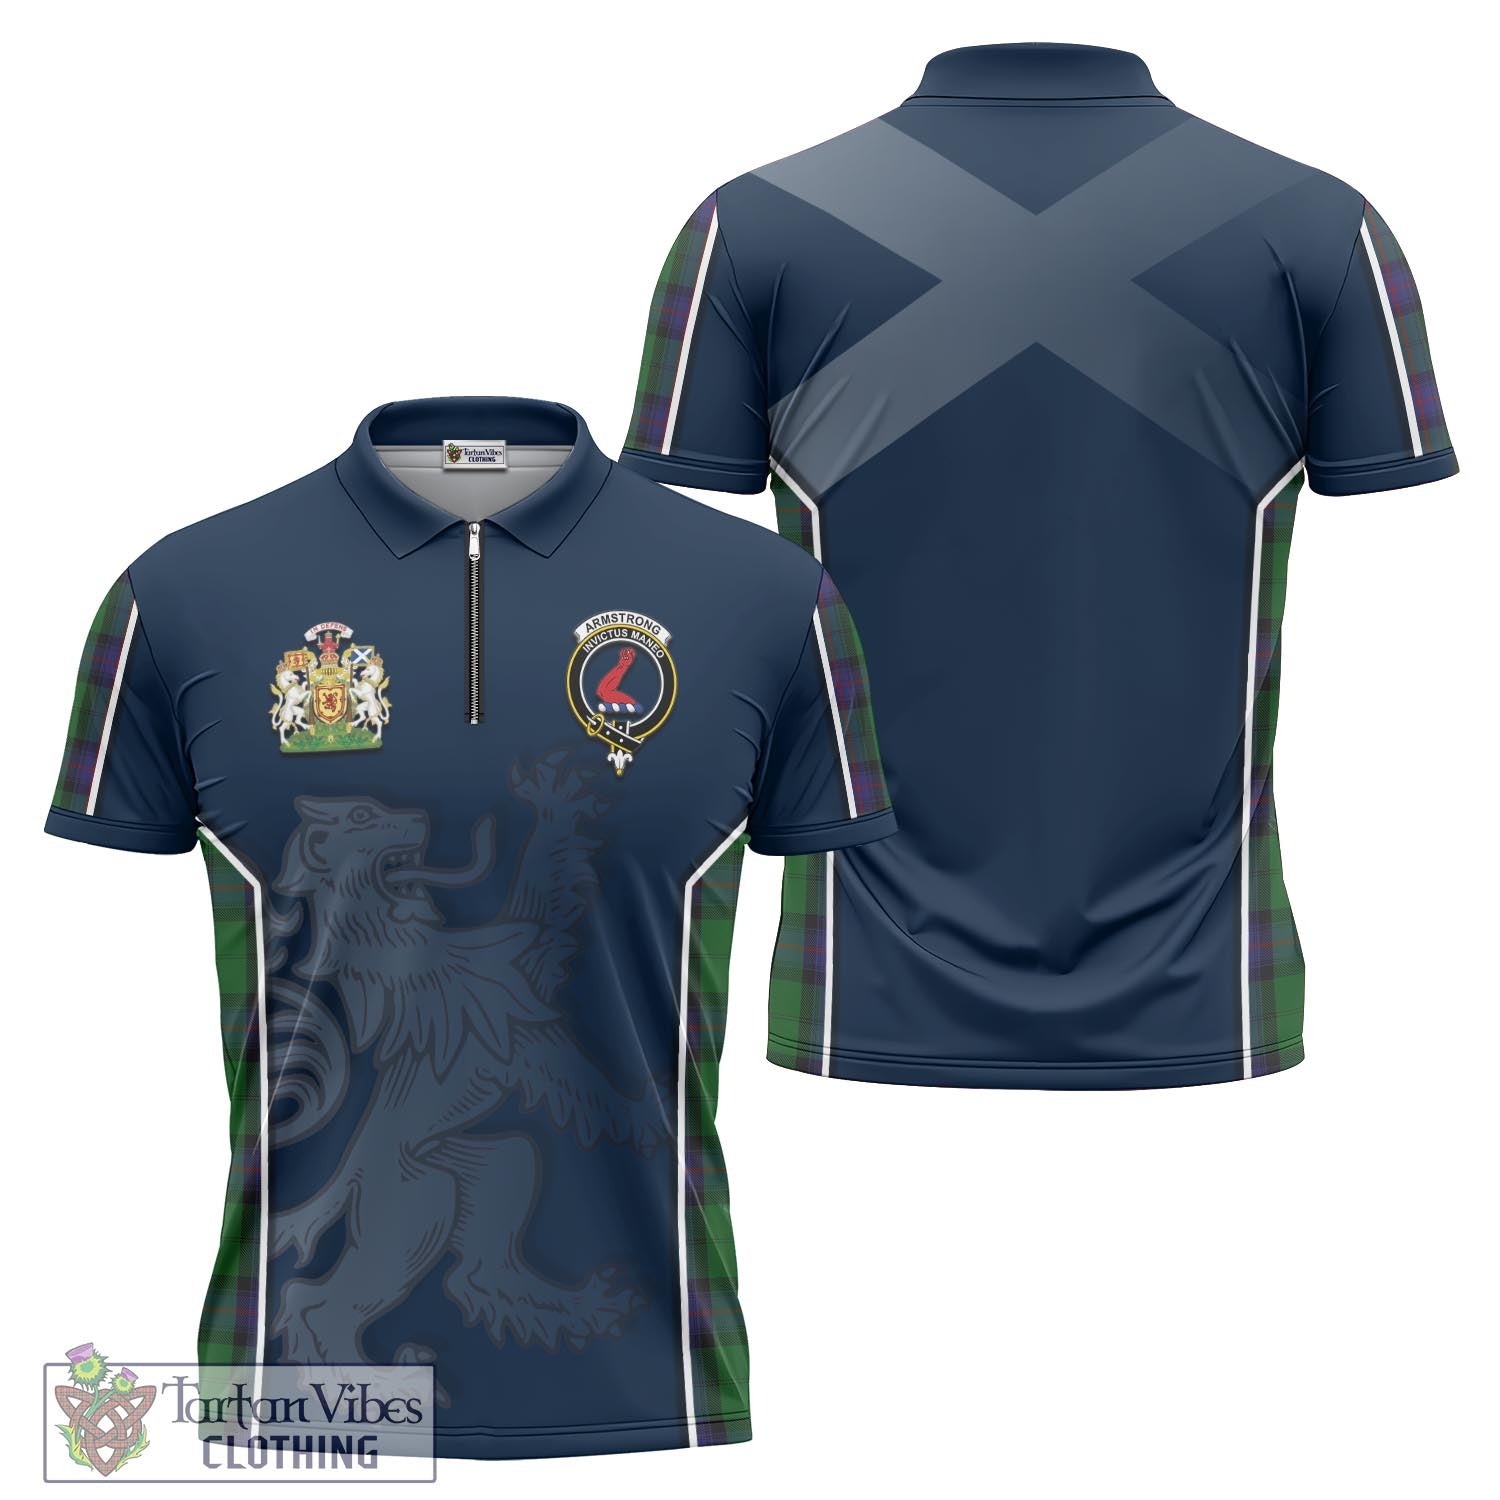 Tartan Vibes Clothing Armstrong Tartan Zipper Polo Shirt with Family Crest and Lion Rampant Vibes Sport Style